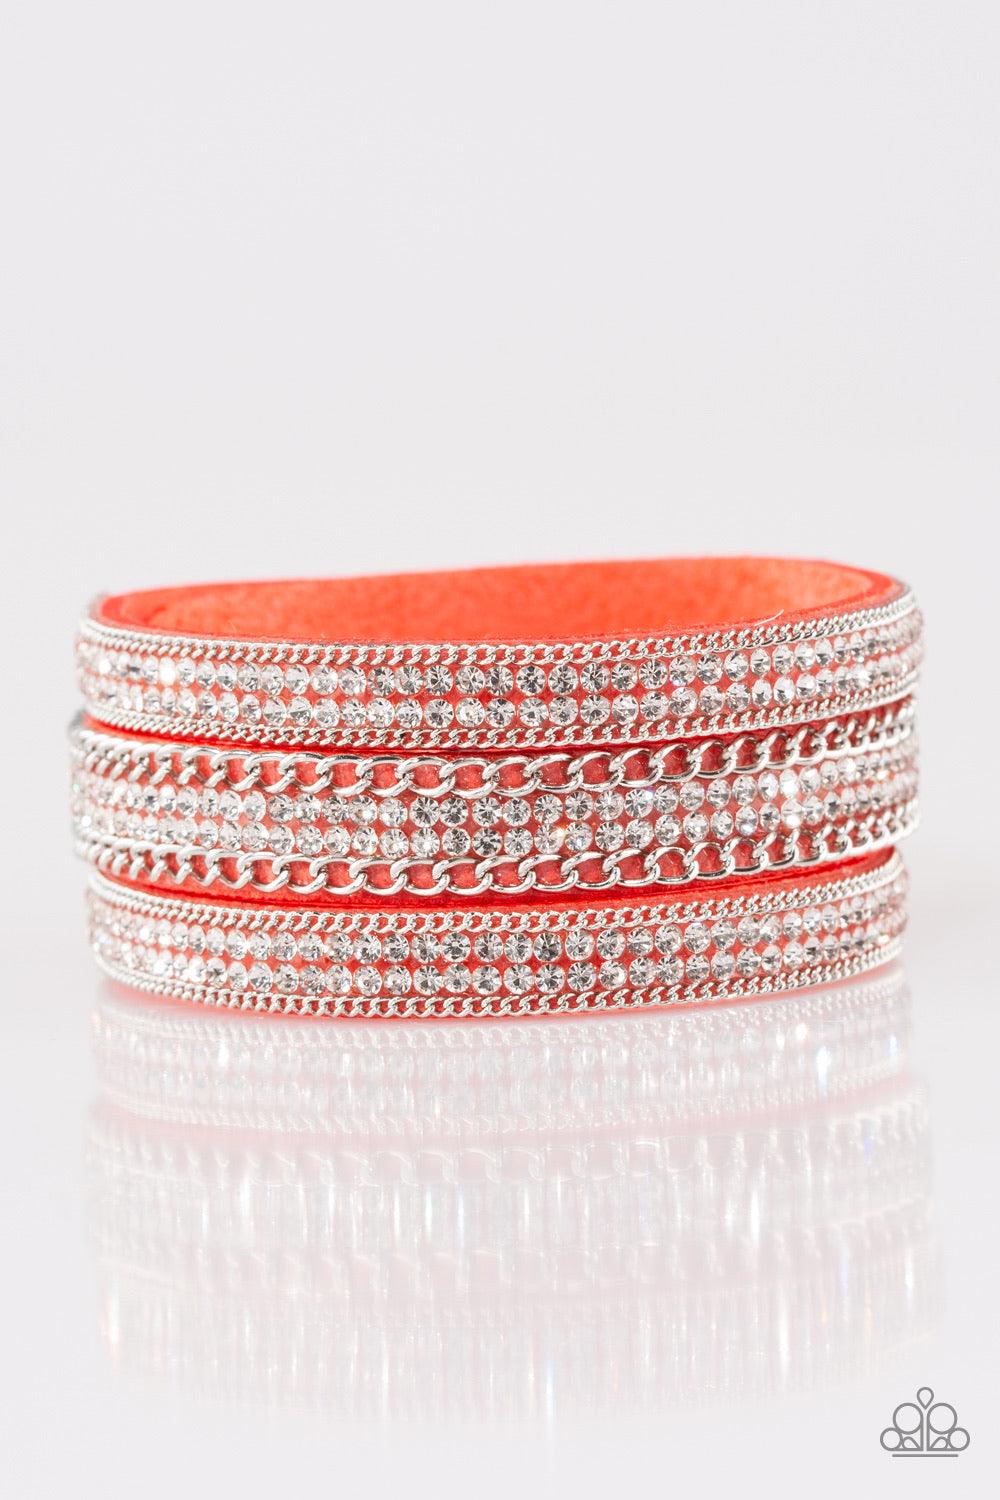 Paparazzi Accessories Dangerously Drama Queen - Orange Rows of shimmery silver chains and glassy white rhinestones are encrusted along a Blooming Dahlia suede band. The glittery band has been spliced into three strands, creating row after row of blinding